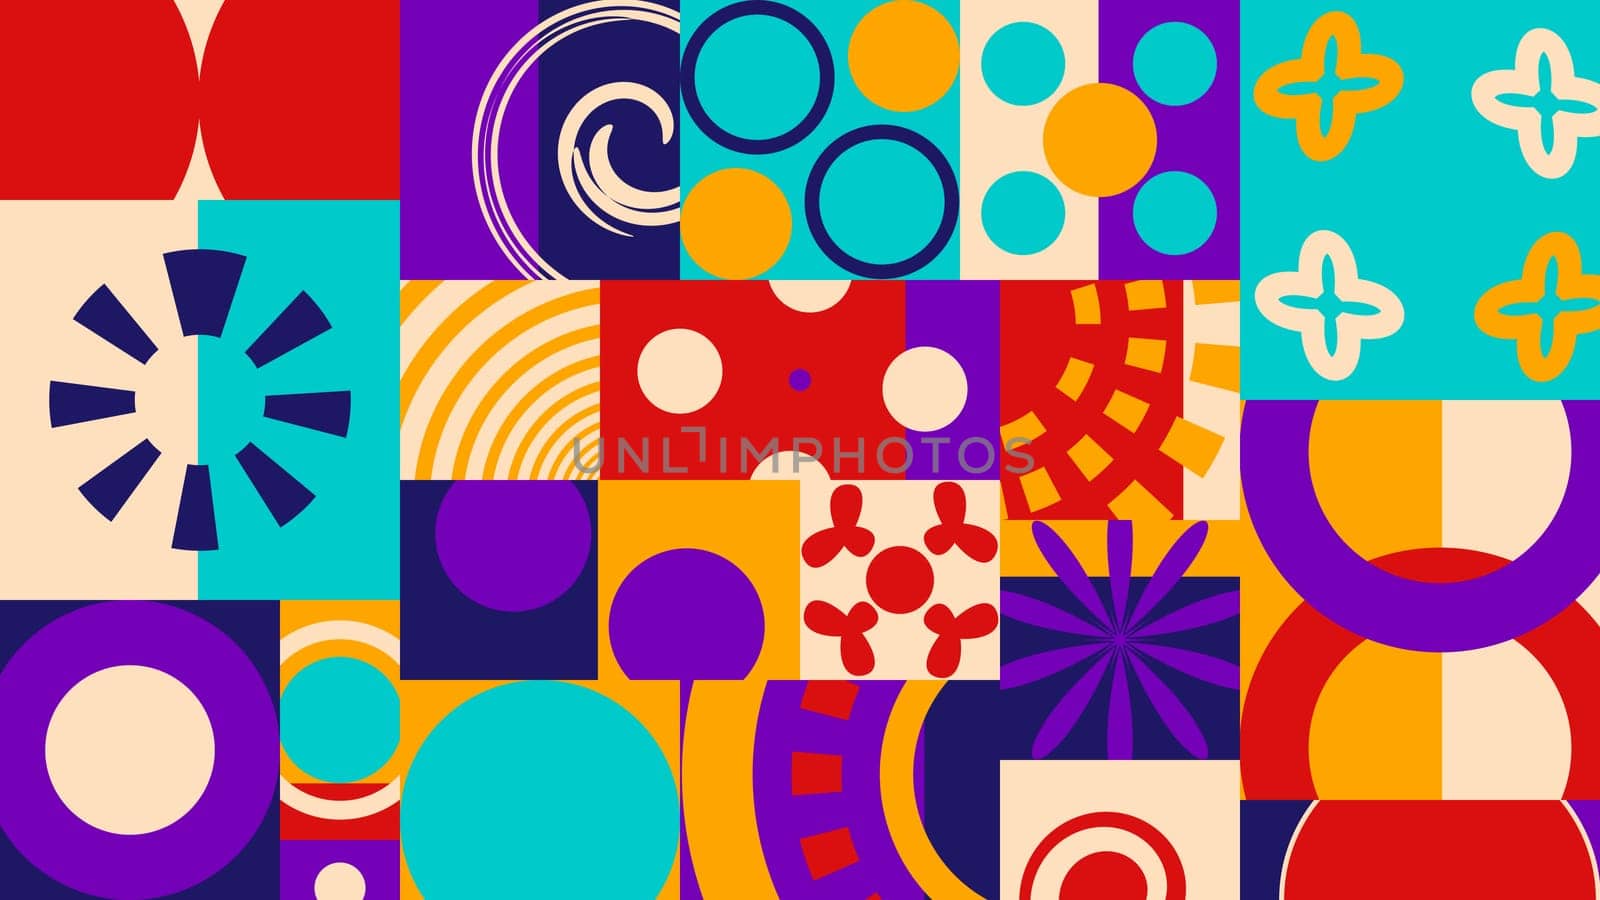 Modern background geometric design with bauhaus style in purple orange red navy color. High quality